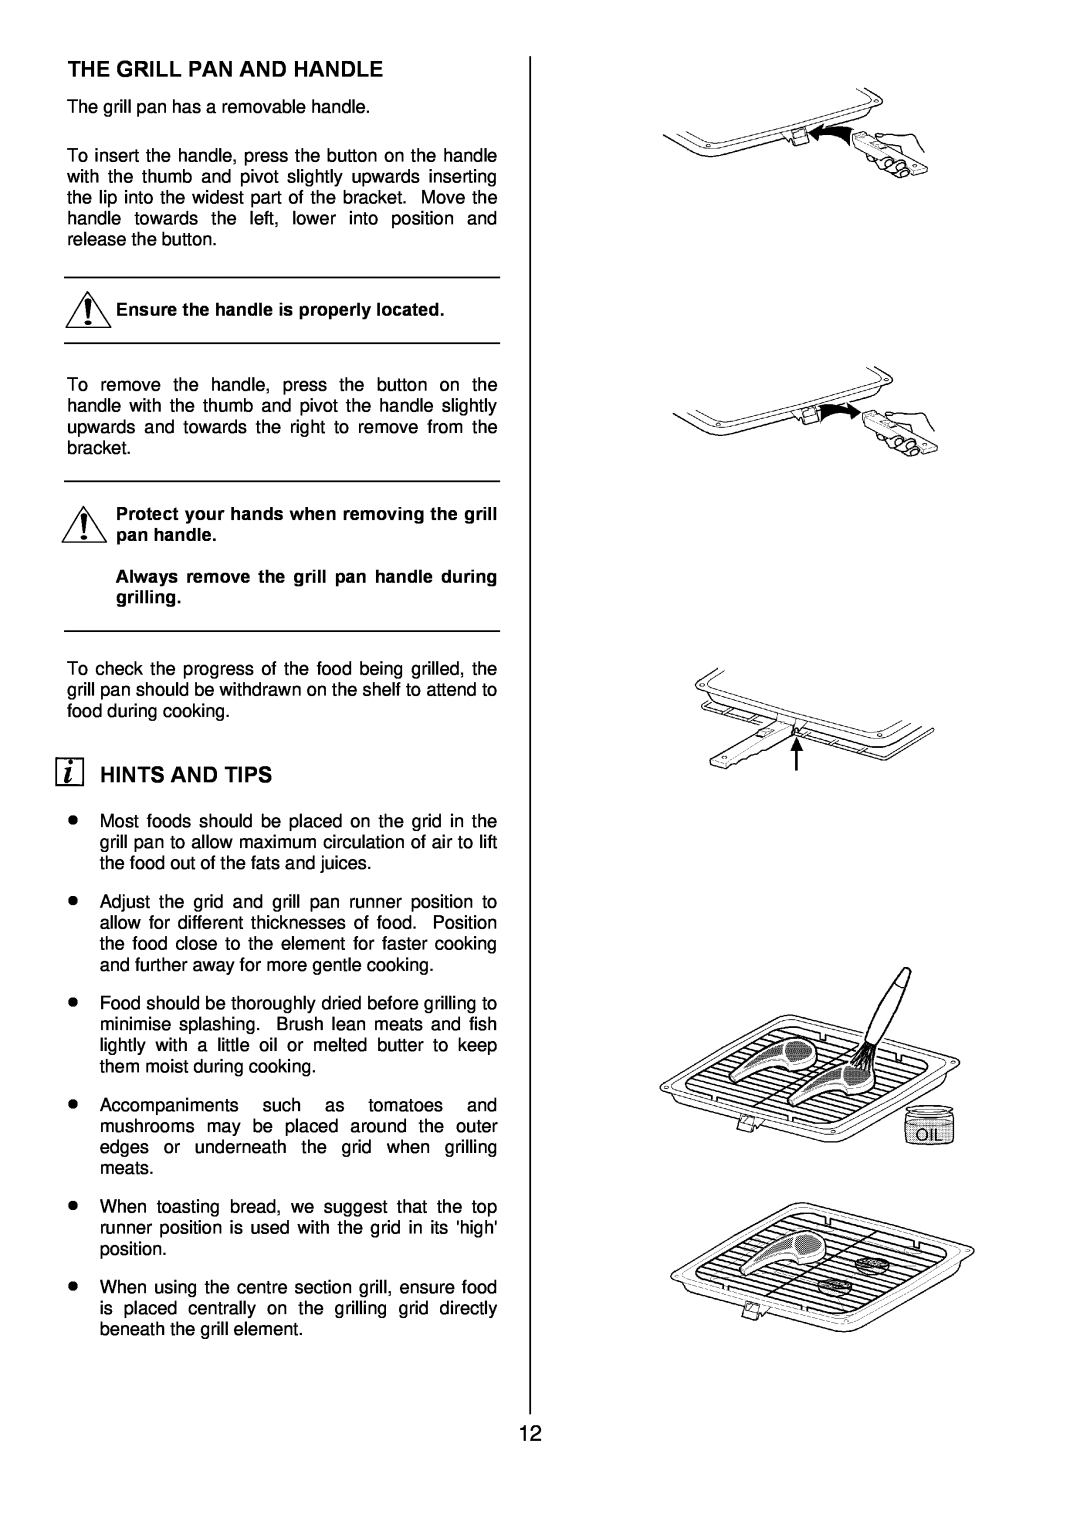 Zanussi ZOD 330 manual The Grill Pan And Handle, Hints And Tips, Ensure the handle is properly located 